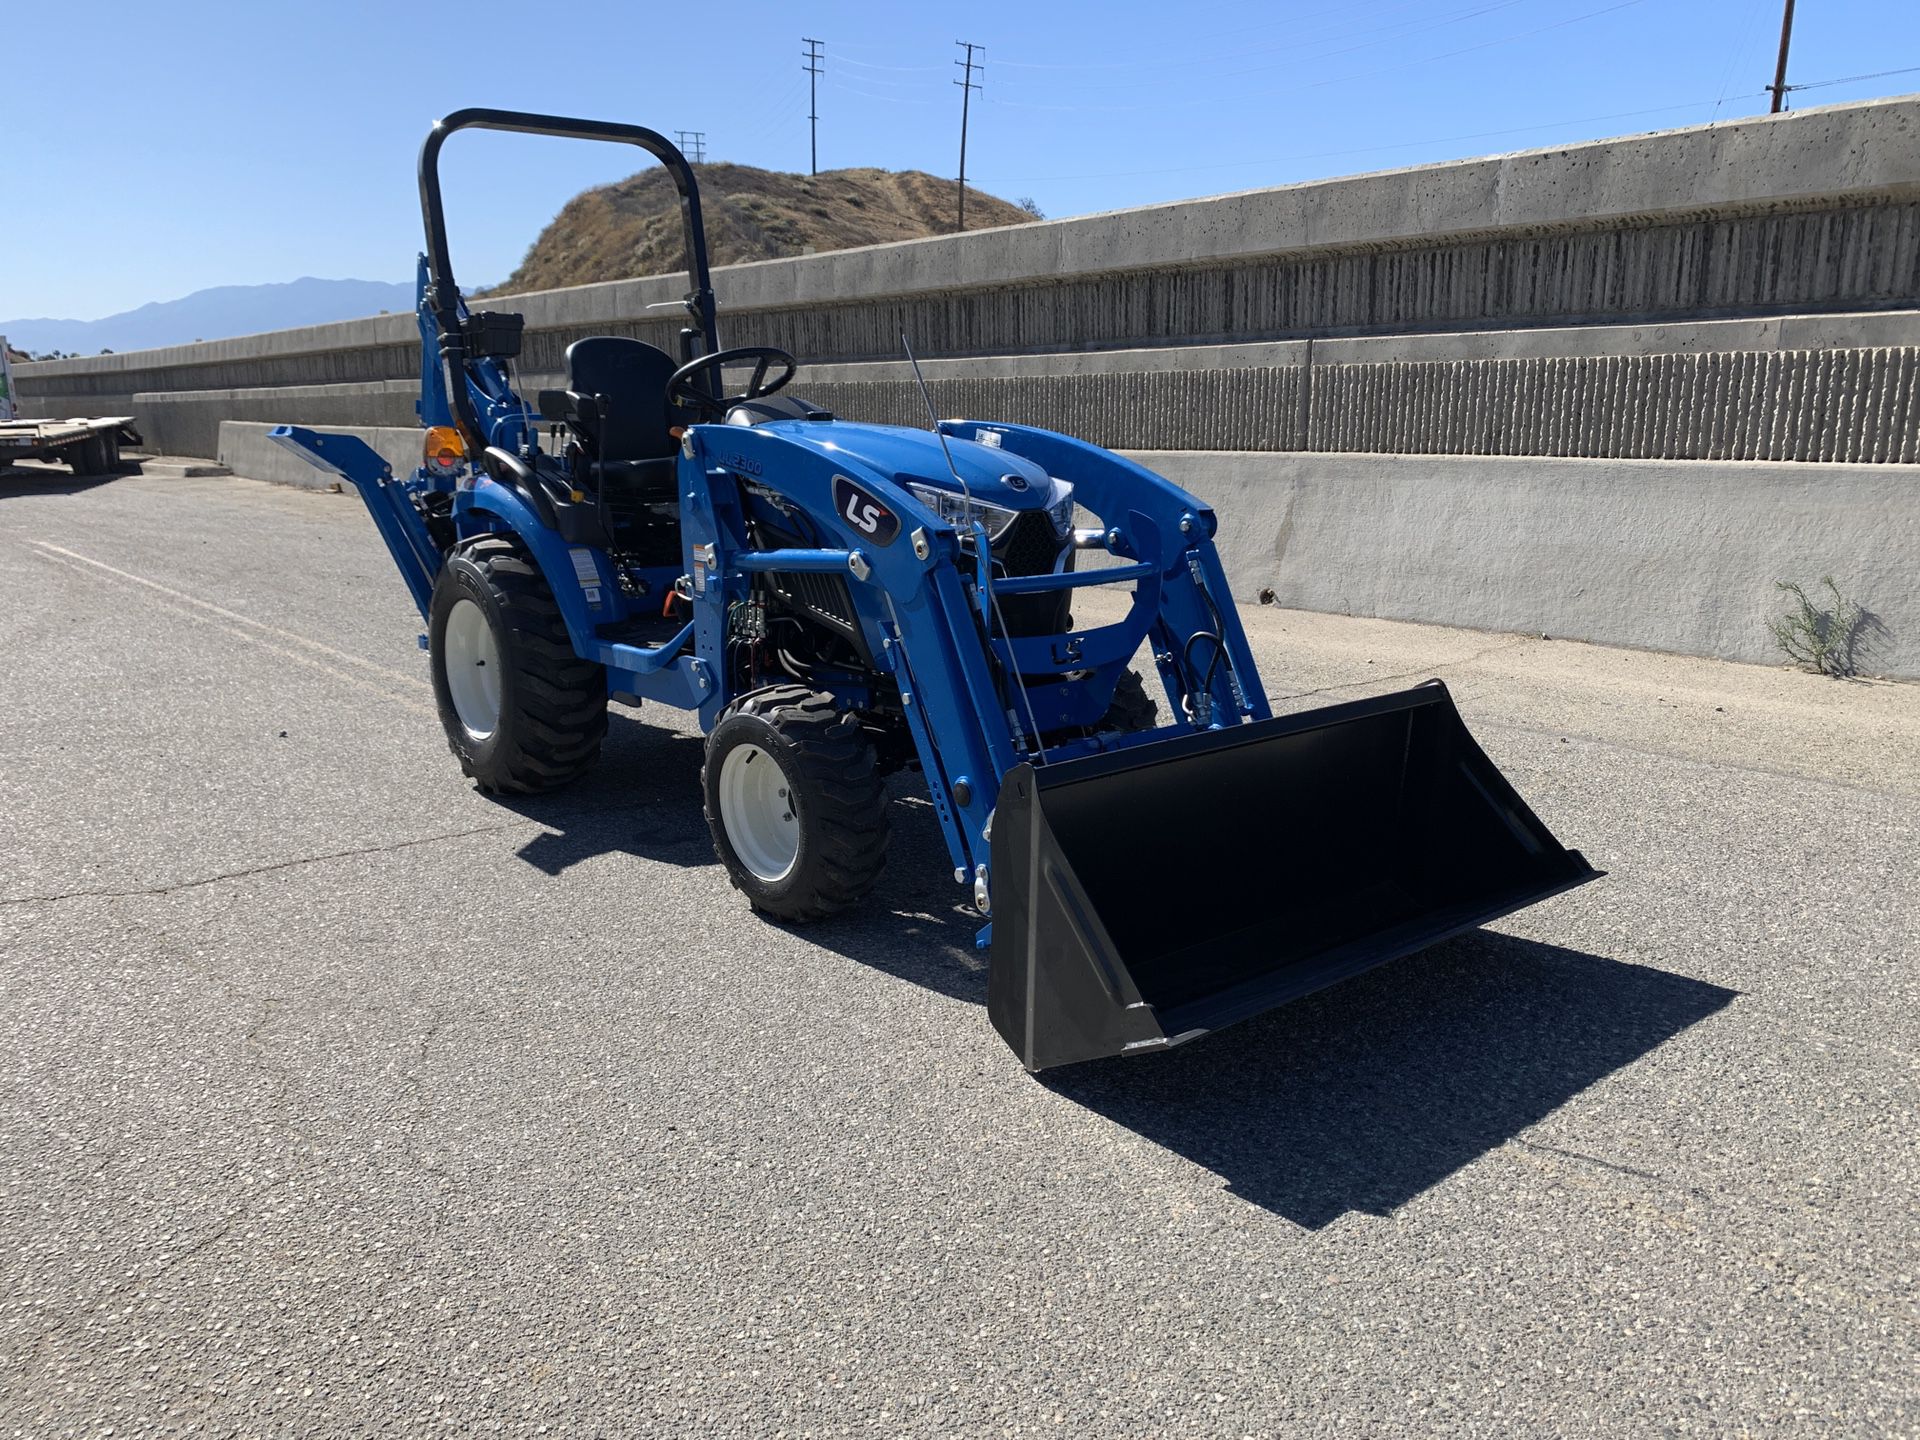 LS TRACTOR MT225S COMPACT TRACTOR WITH A FRONT LOADER & BACKHOE FOR SALE